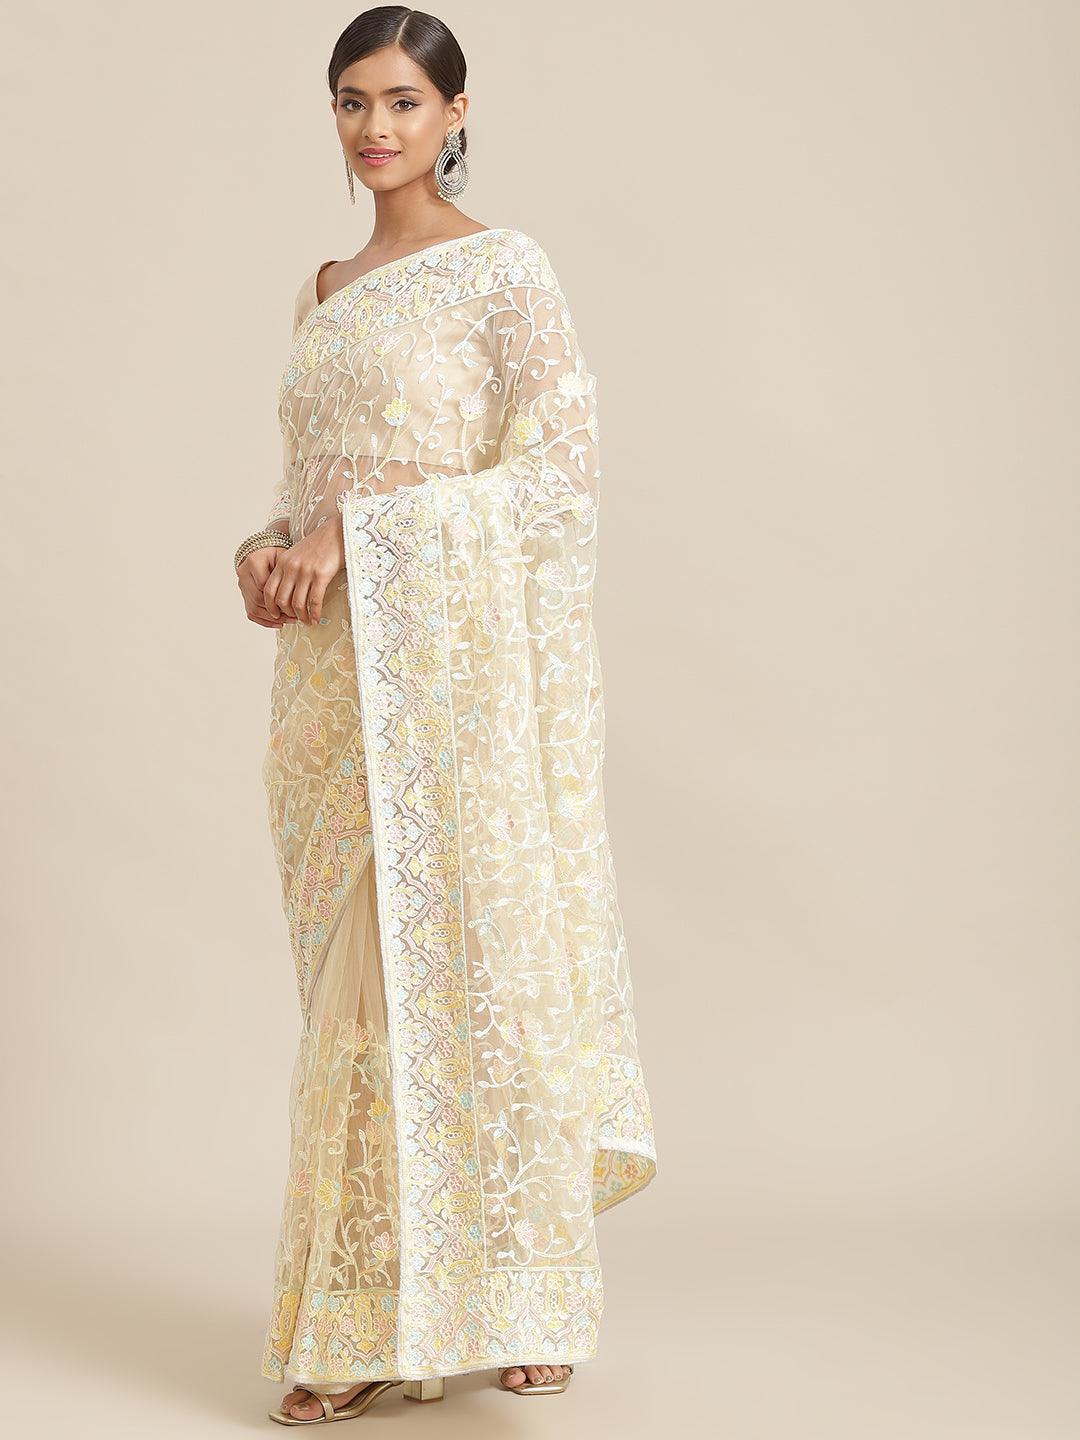 Wedding Wear Glaring Floral Embroidery Work On Light Yellow Net Saree - Indiakreations